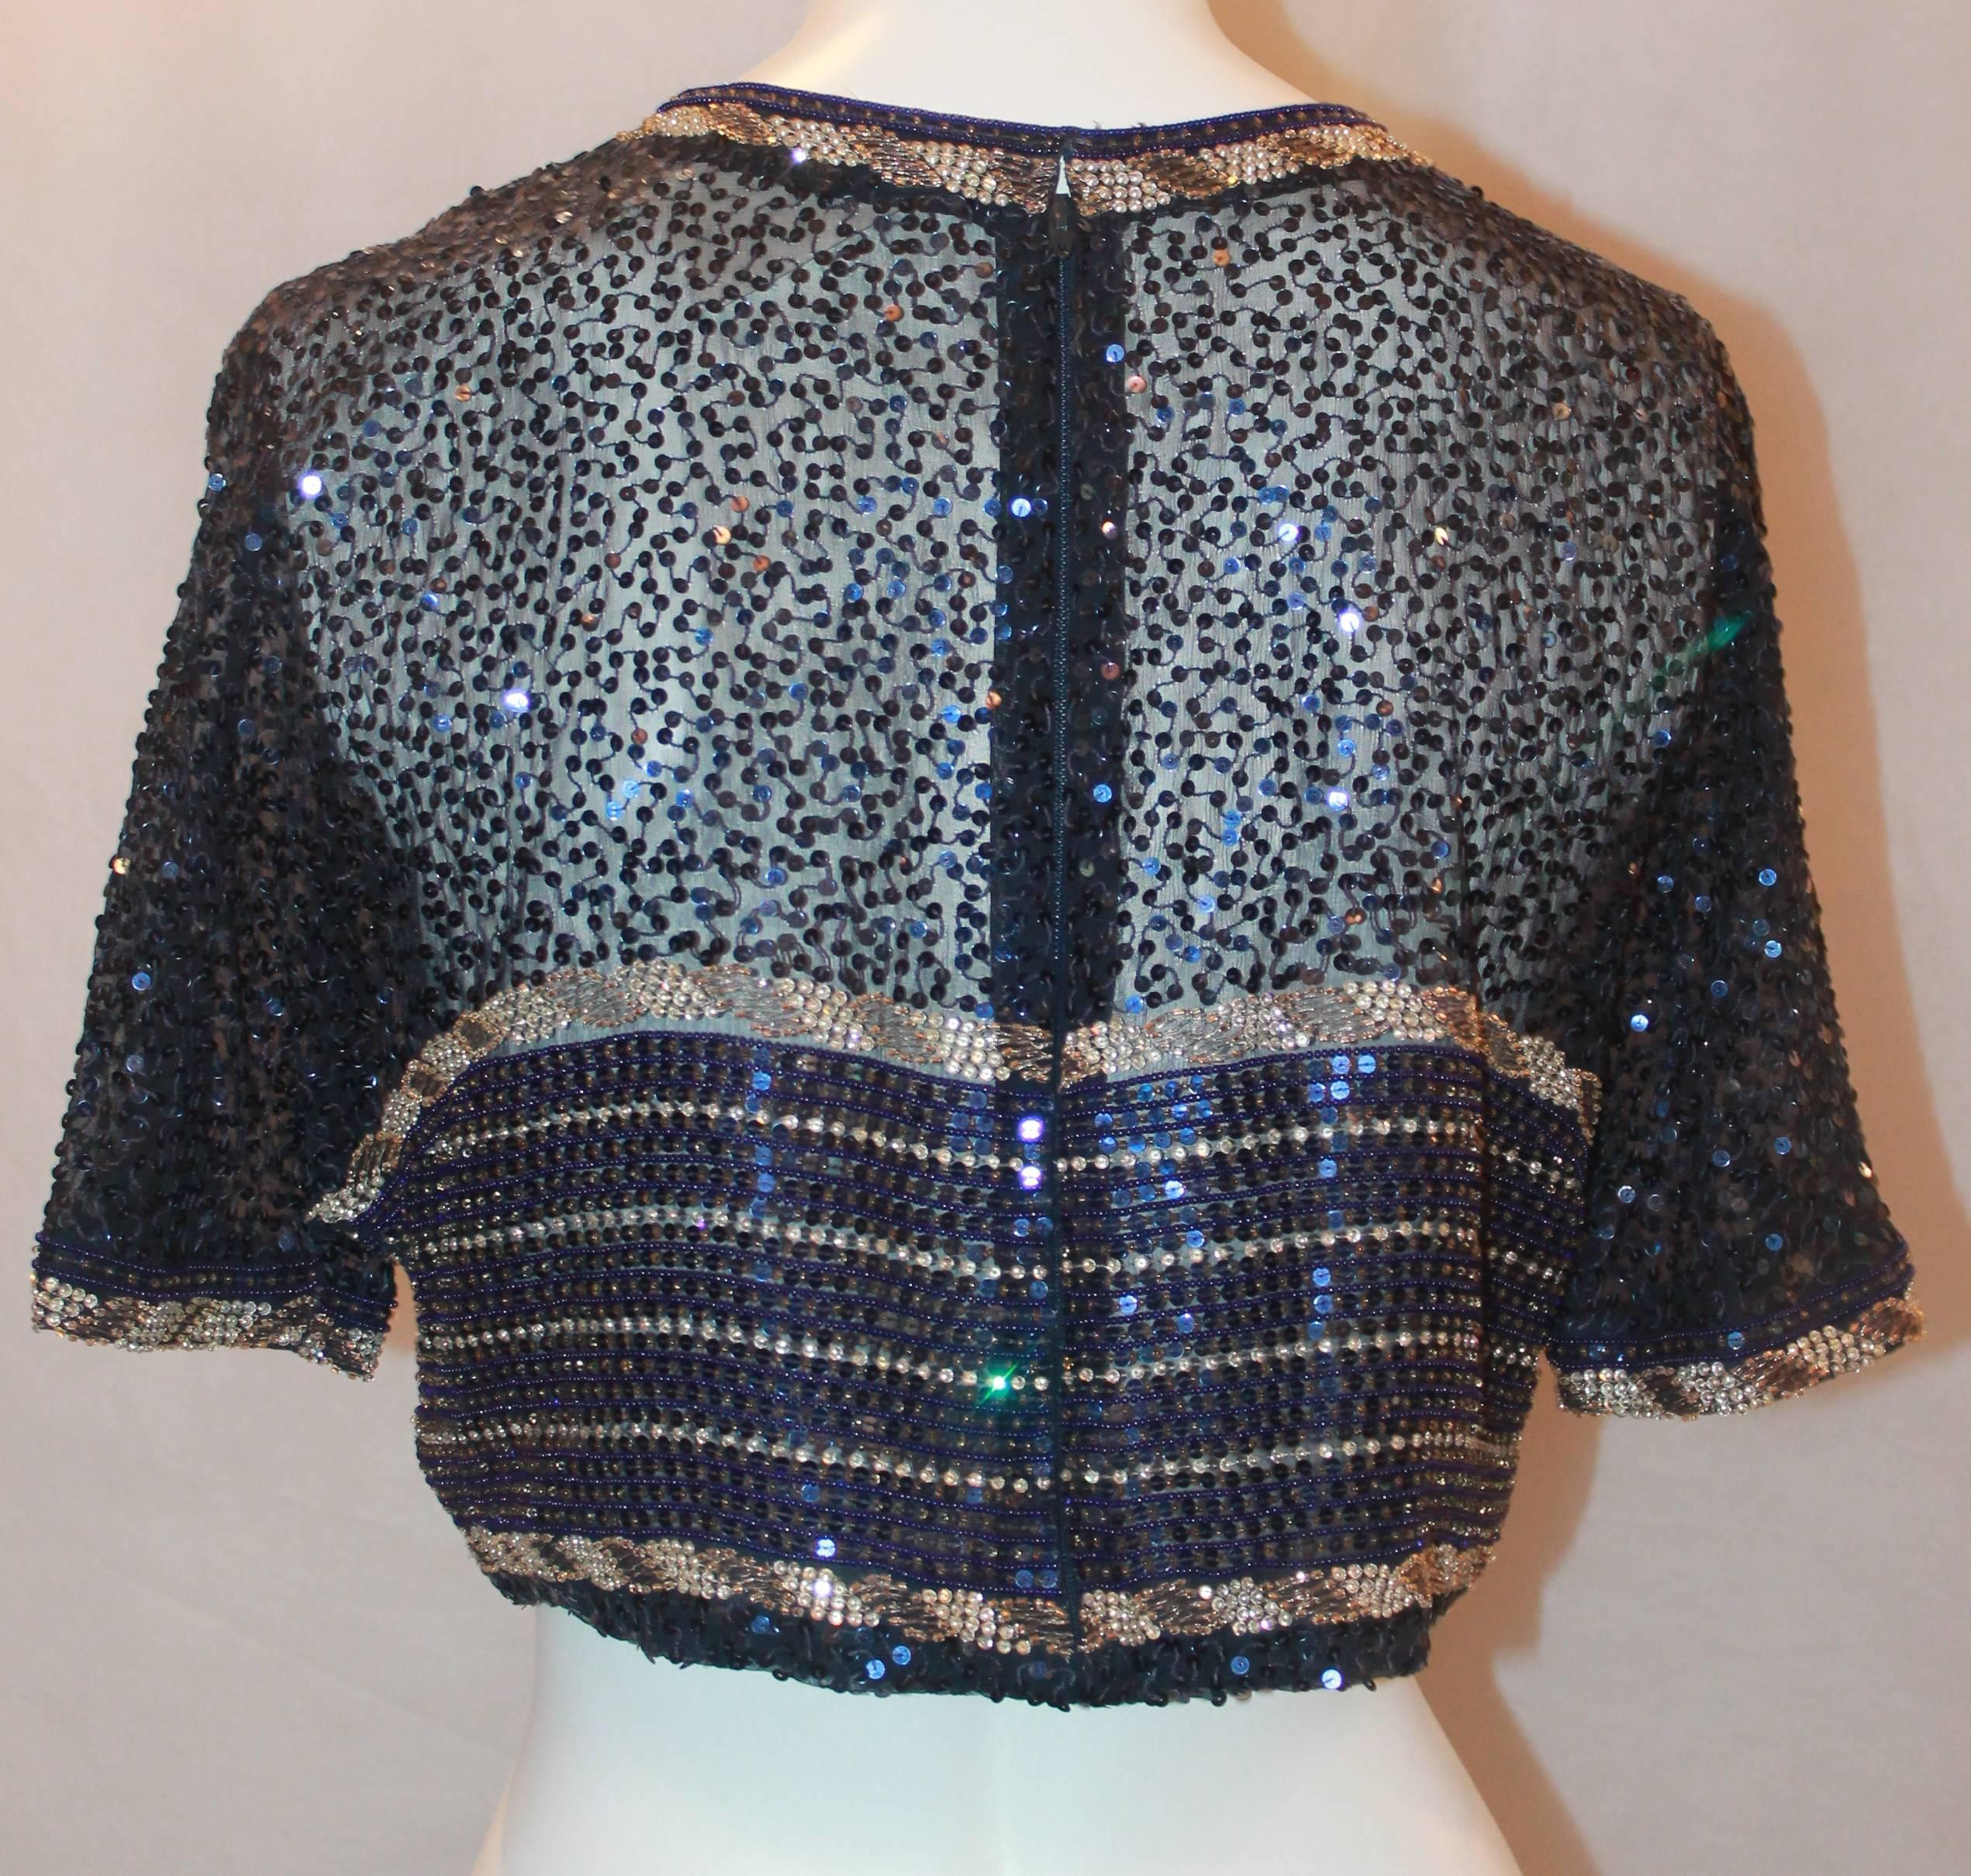 Women's Vintage Black & Gold Beaded and Sequined Crop Top with Anchor Design - S